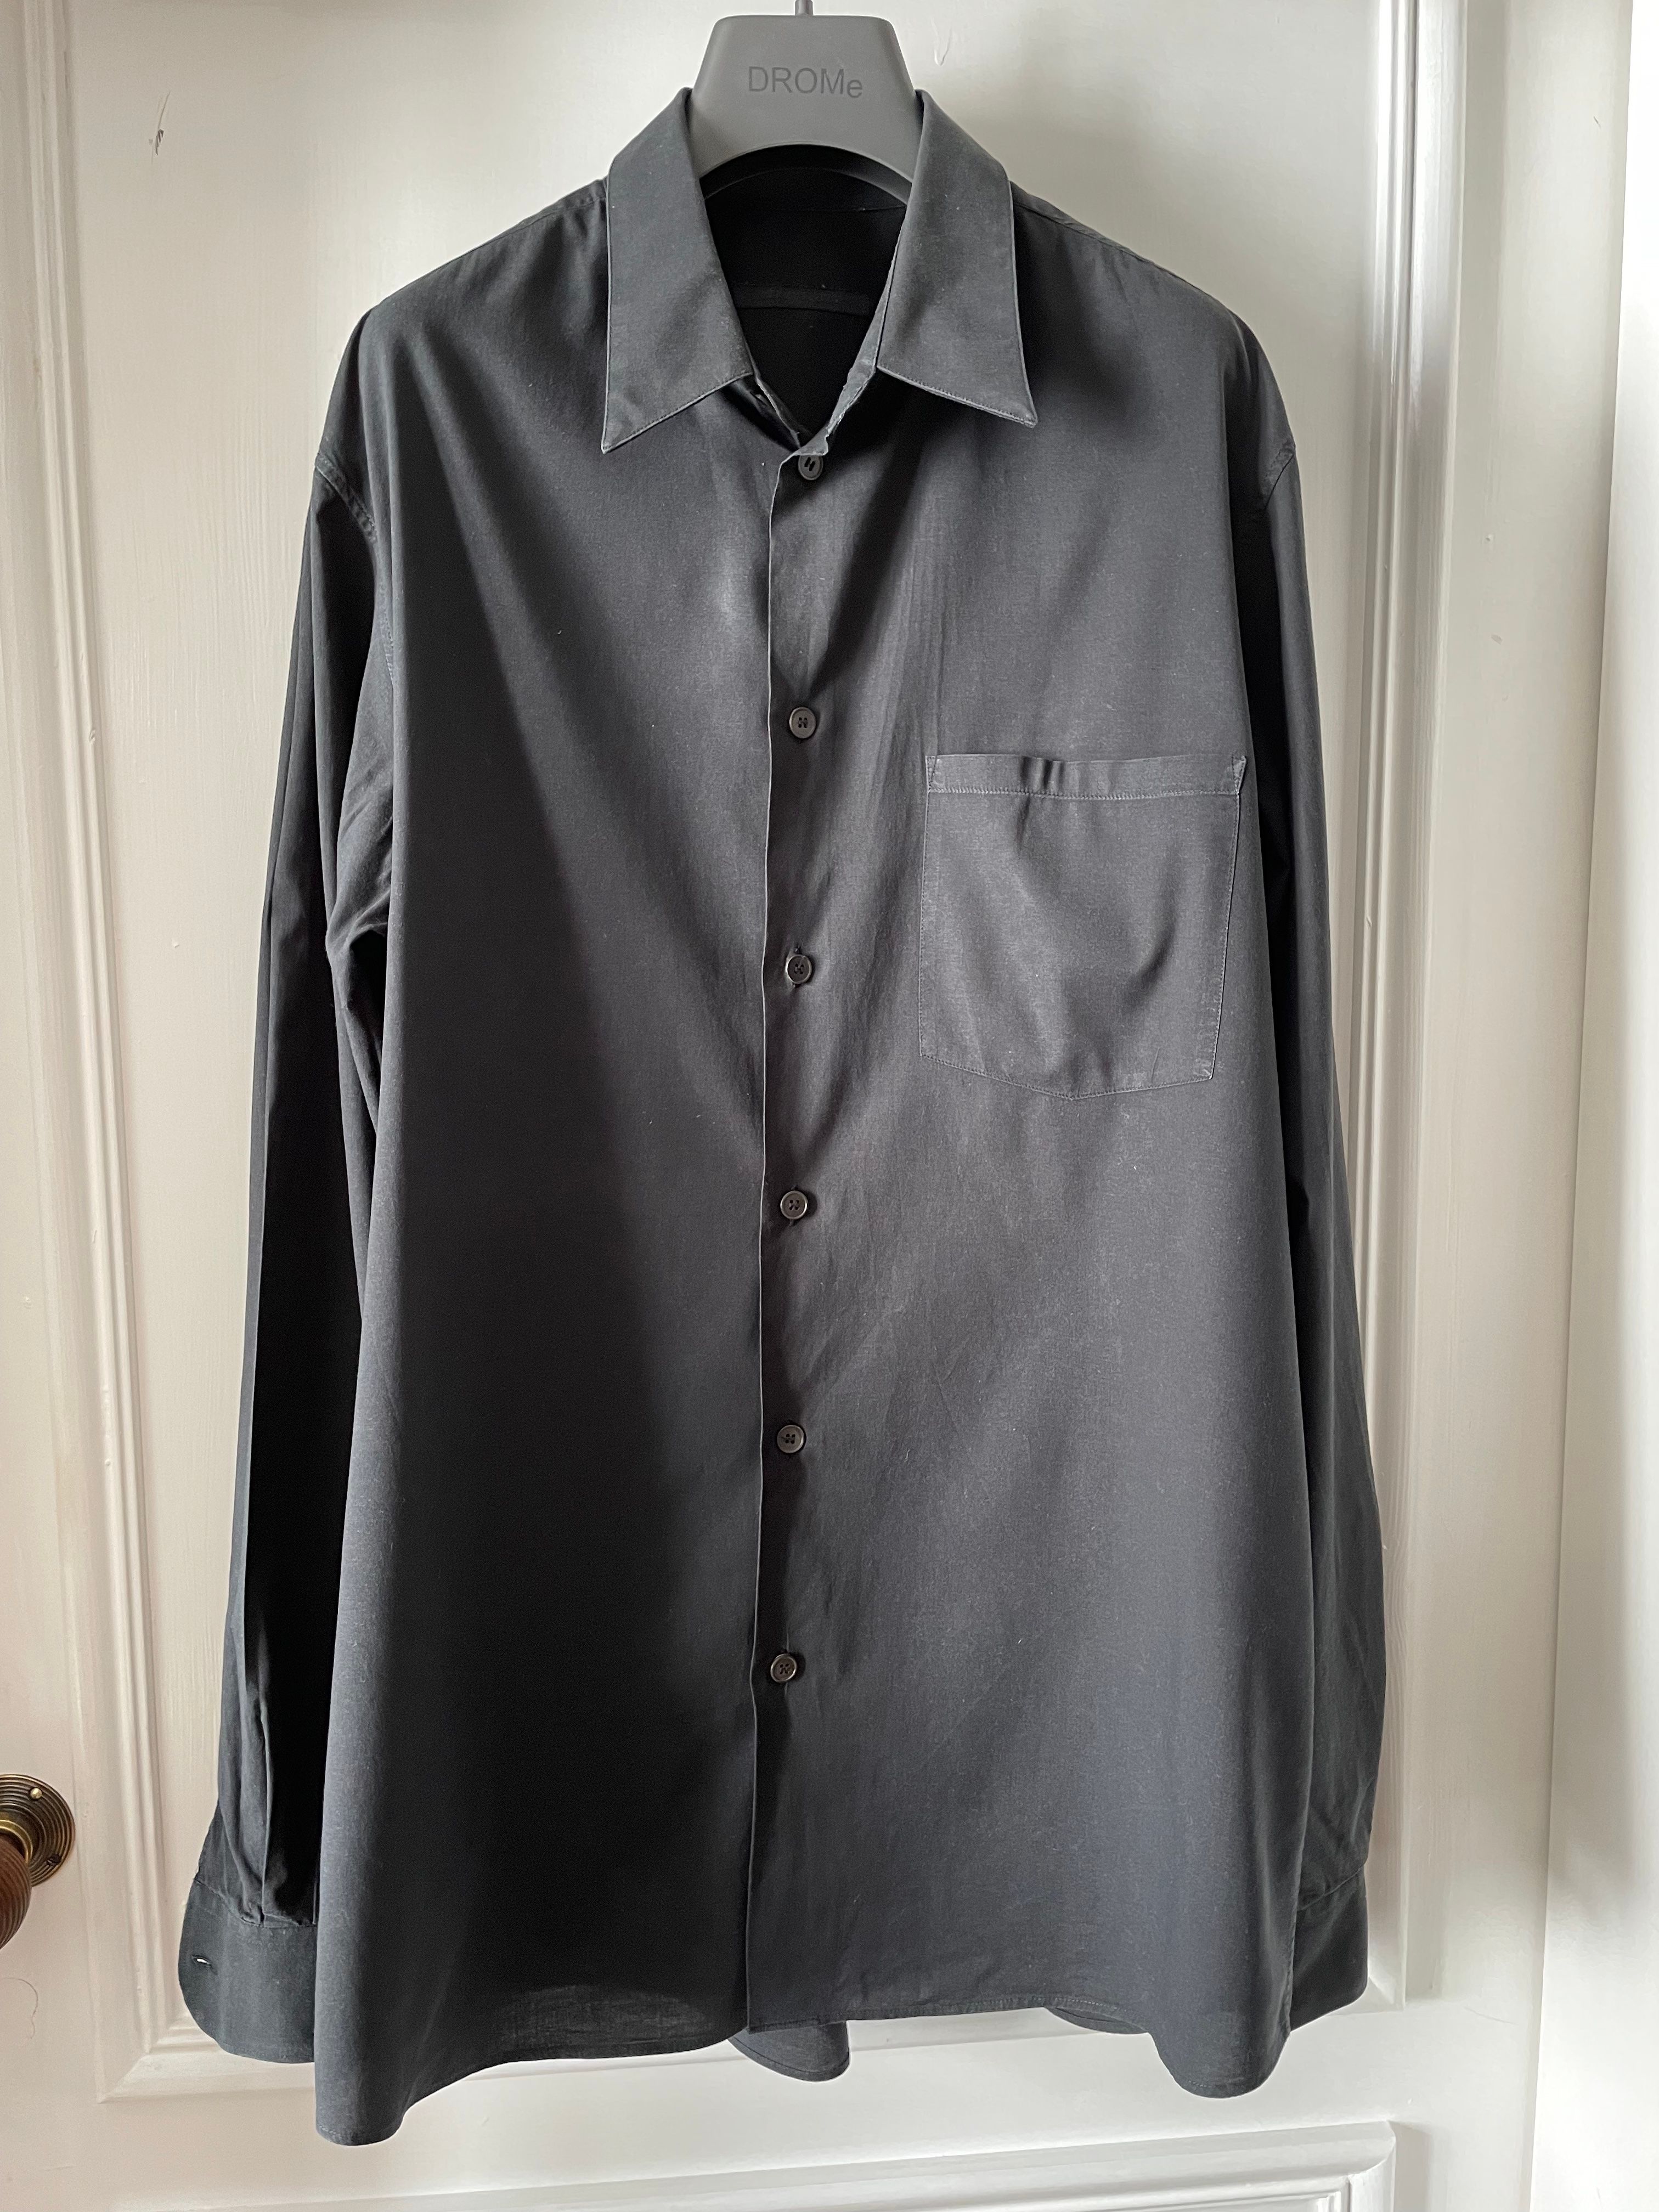 Pre-owned Helmut Lang X Vintage Helmut Lang Vintage Shirt Size 41-(16) Very Soft Material In Mix